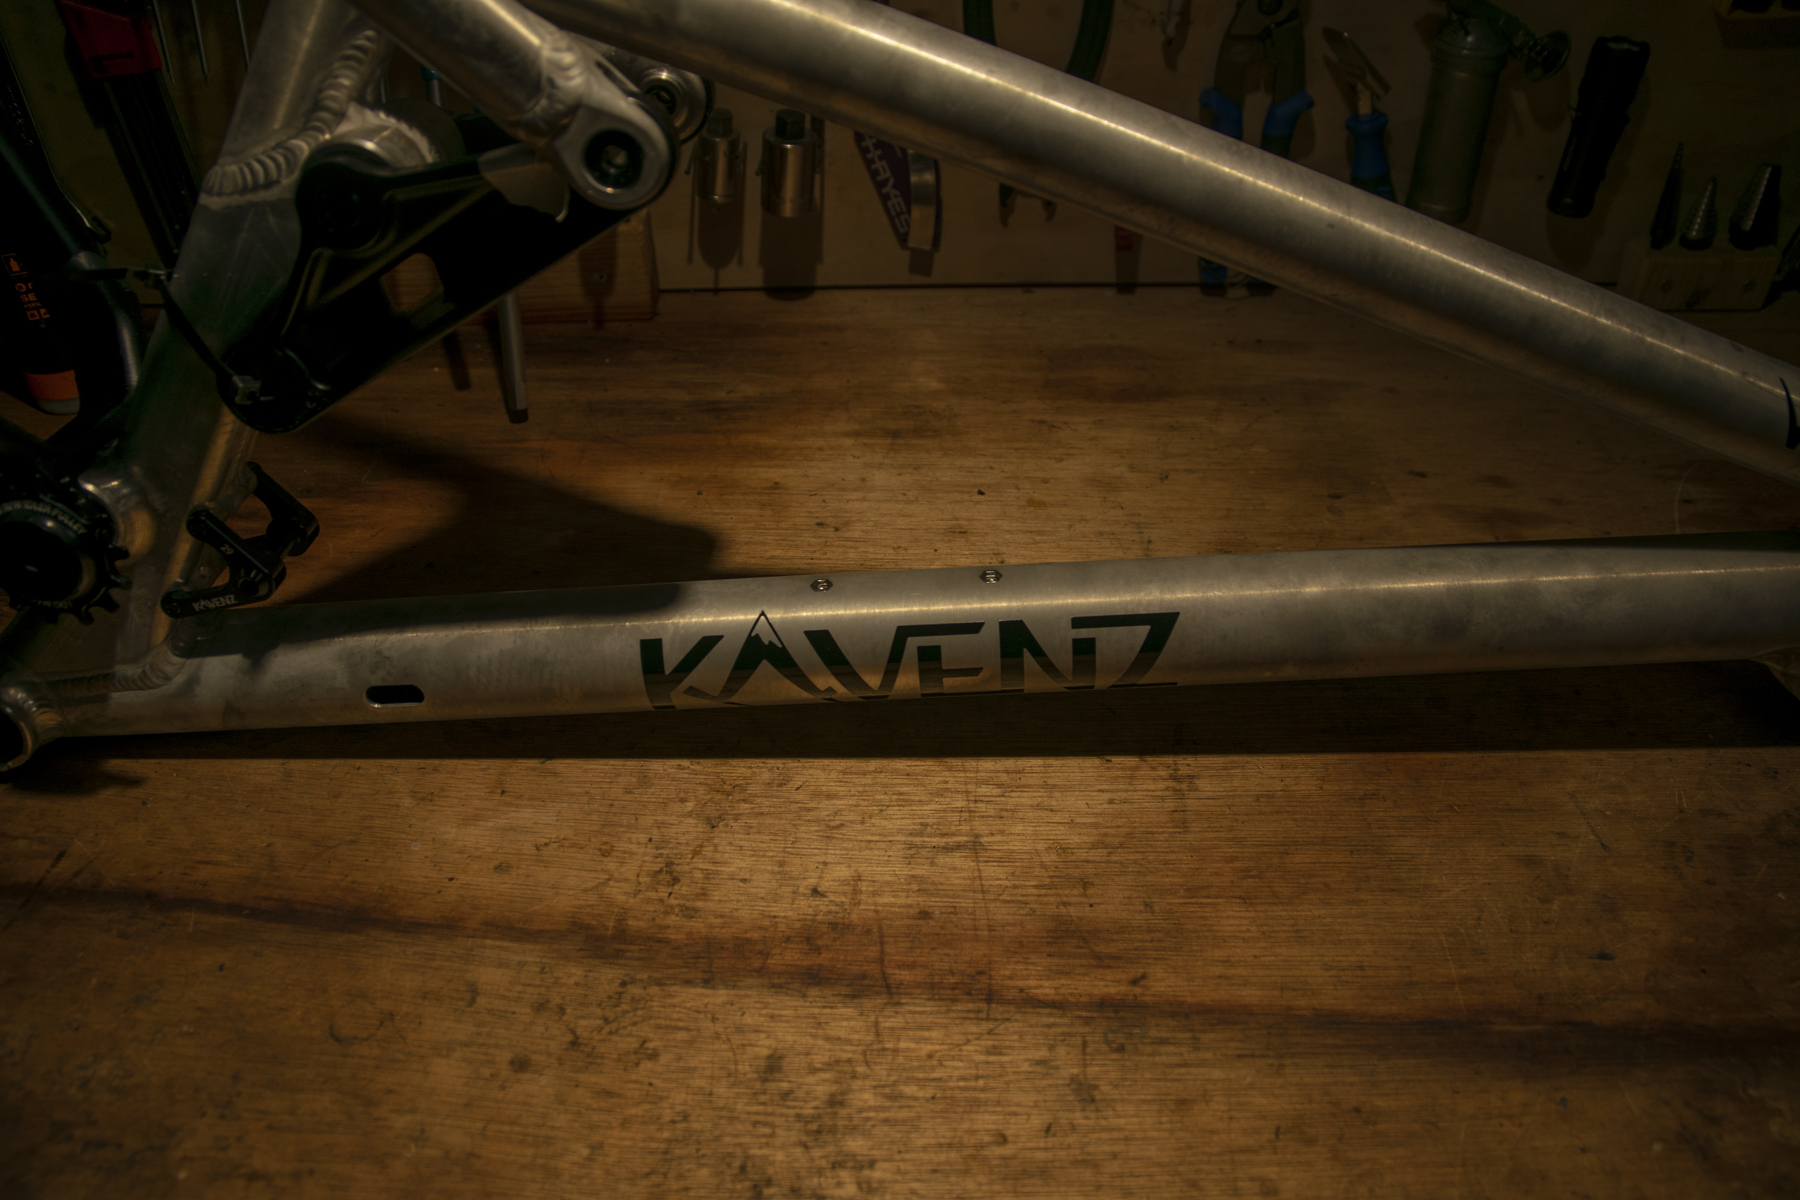 David Golay reviews the Kavenz VHP 16 for Blister